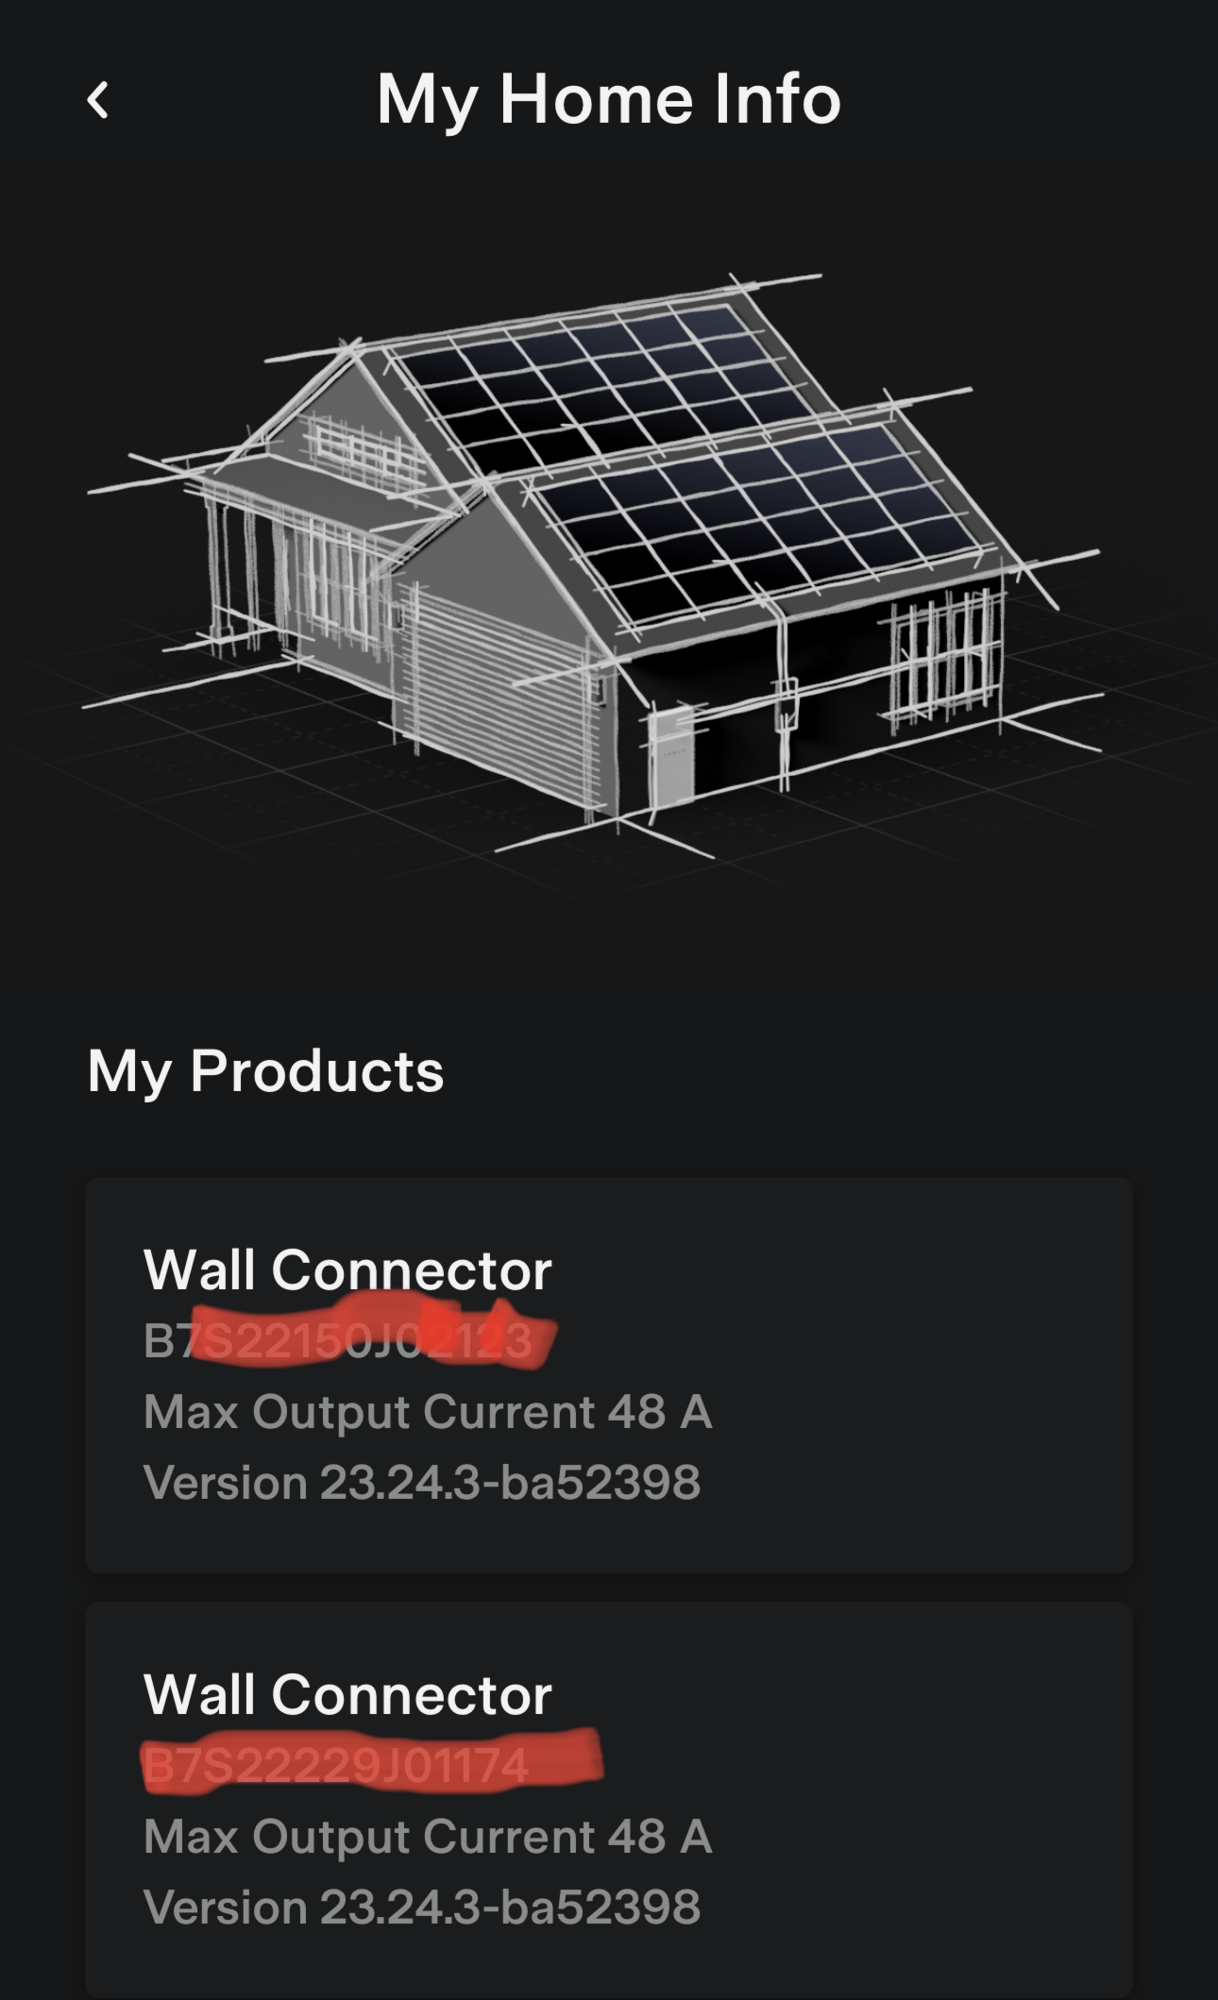 You'll soon be able to connect your Wall Connector to Tesla's app